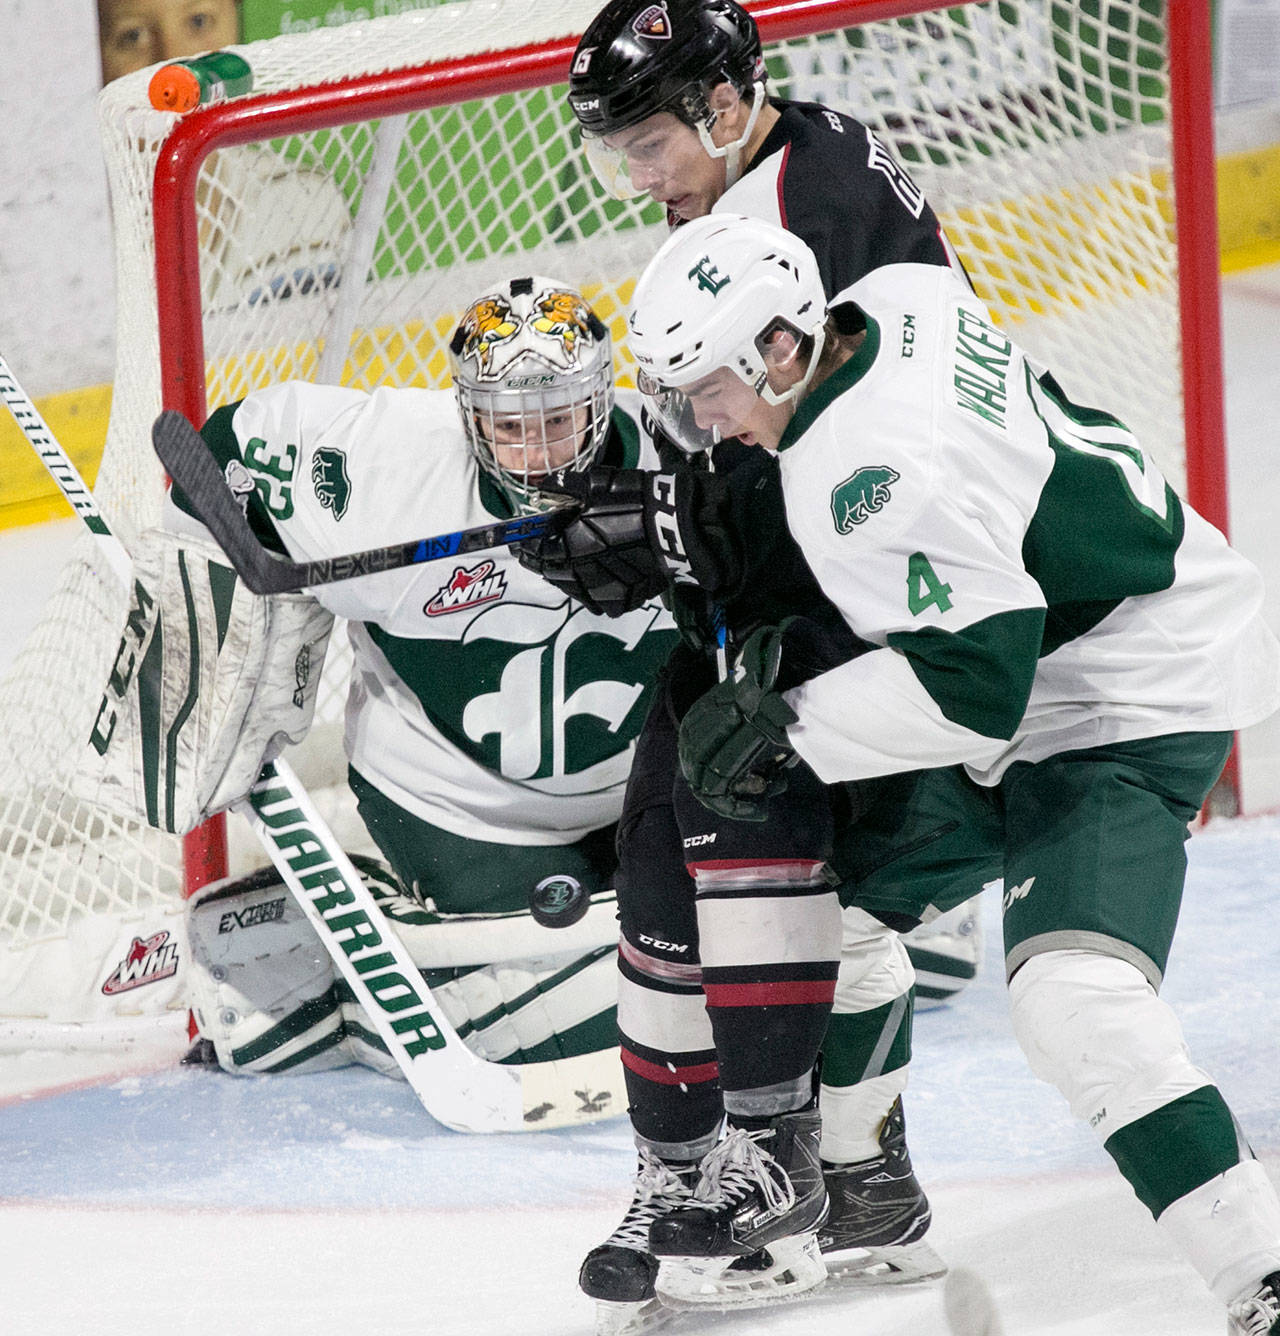 The Silvertips’ Ian Walker (right) and goalie Dustin Wolf (left) defends against Vancouver’s Owen Hardy (center) during a game on Dec. 29, 2017, at Angels of the Winds Arena in Everett. (Kevin Clark / The Daily Herald)